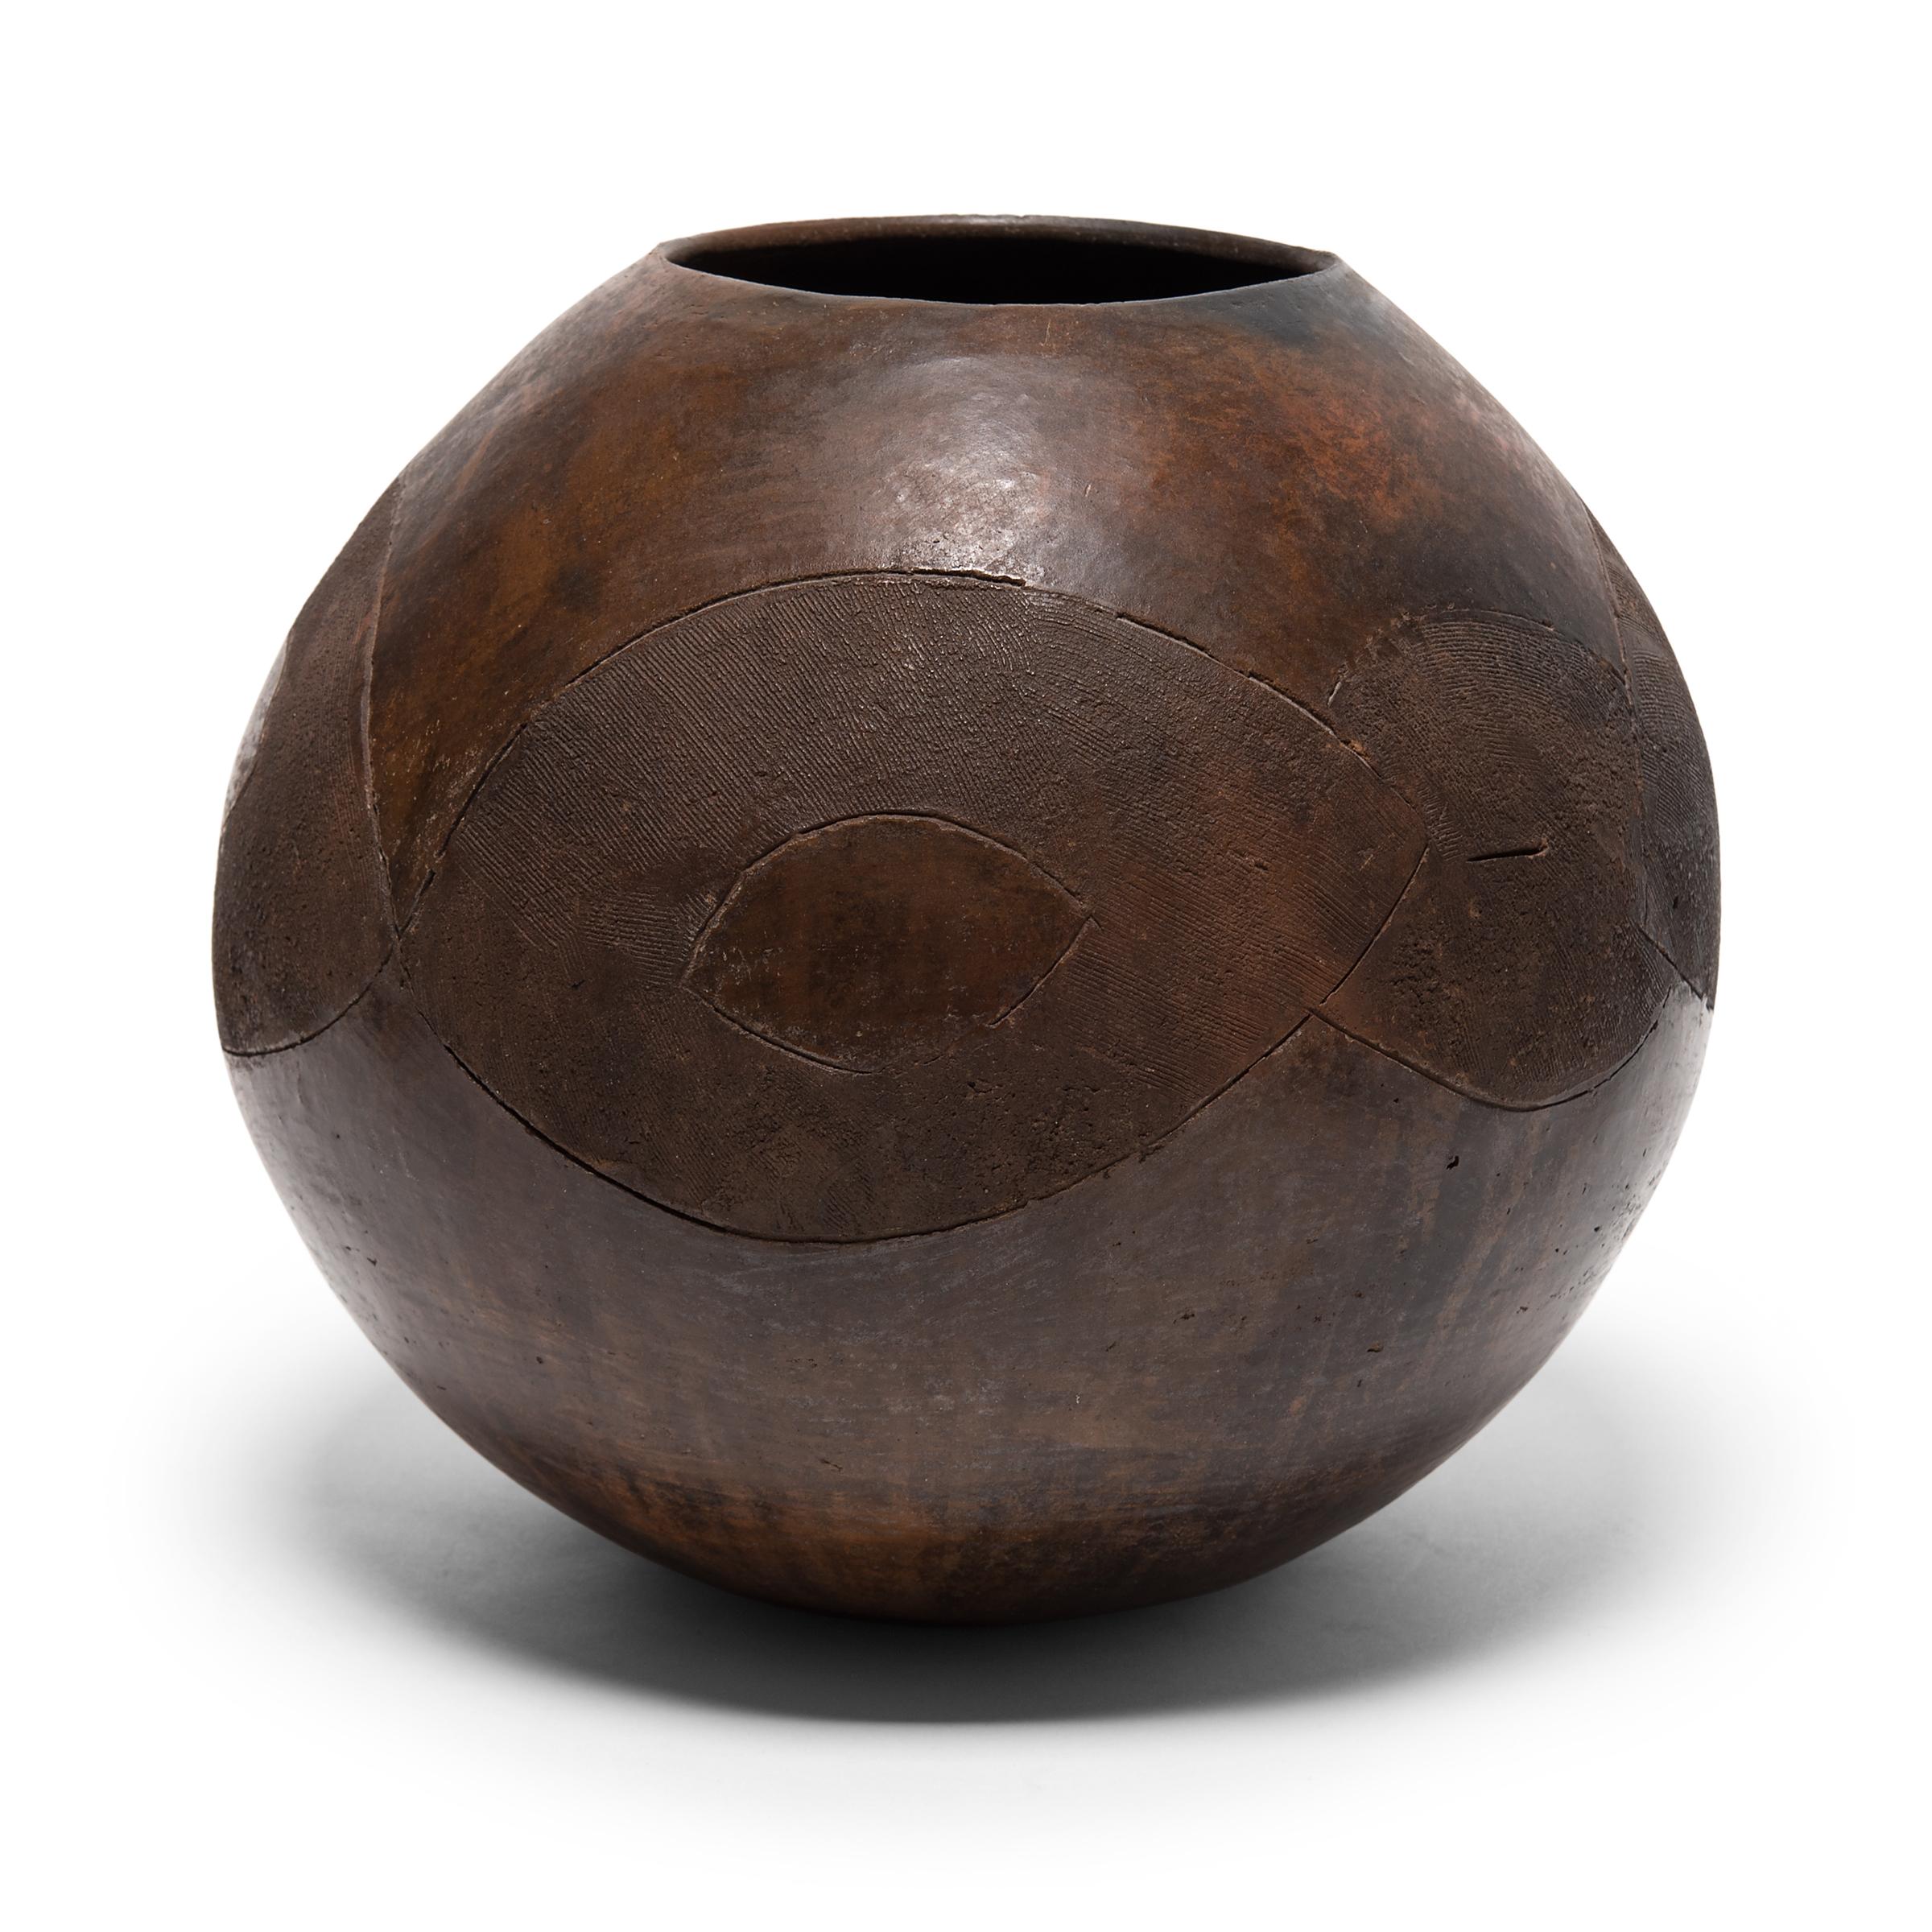 The Zulu people of South Africa create ceramic works of unrivaled balance and weightlessness. This is particularly apparent in the standardized form of the ukhamba, a communal vessel used for drinking sorghum beer. Carrying into the present notions